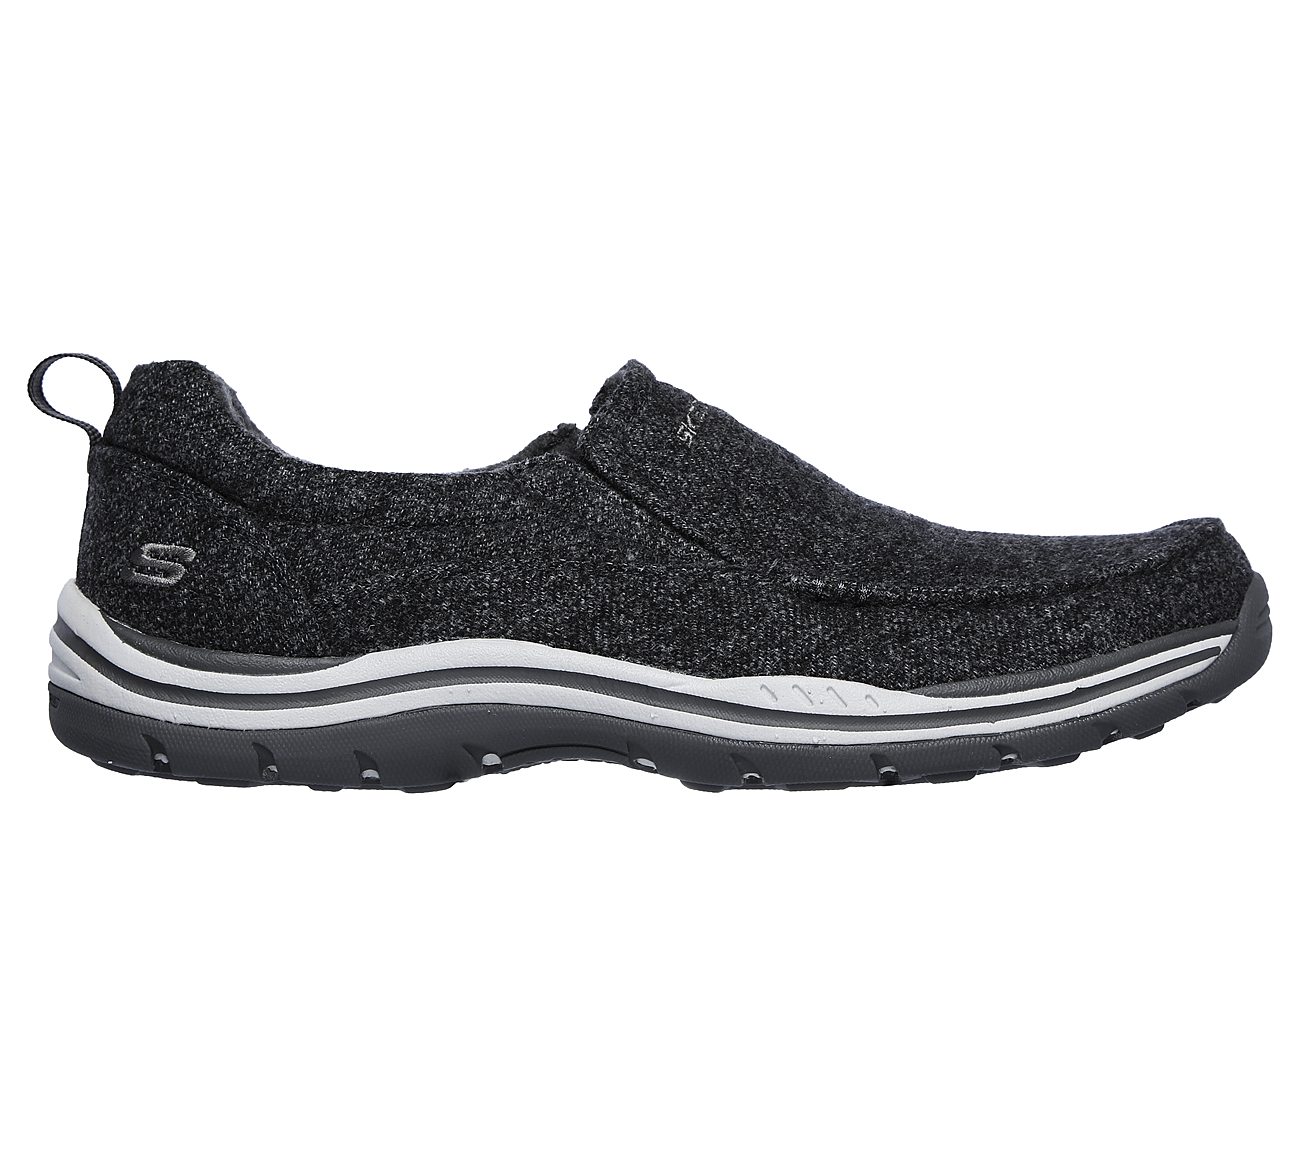 Buy SKECHERS Wash-A-Wools: Expected - Pitzen USA Casuals Shoes